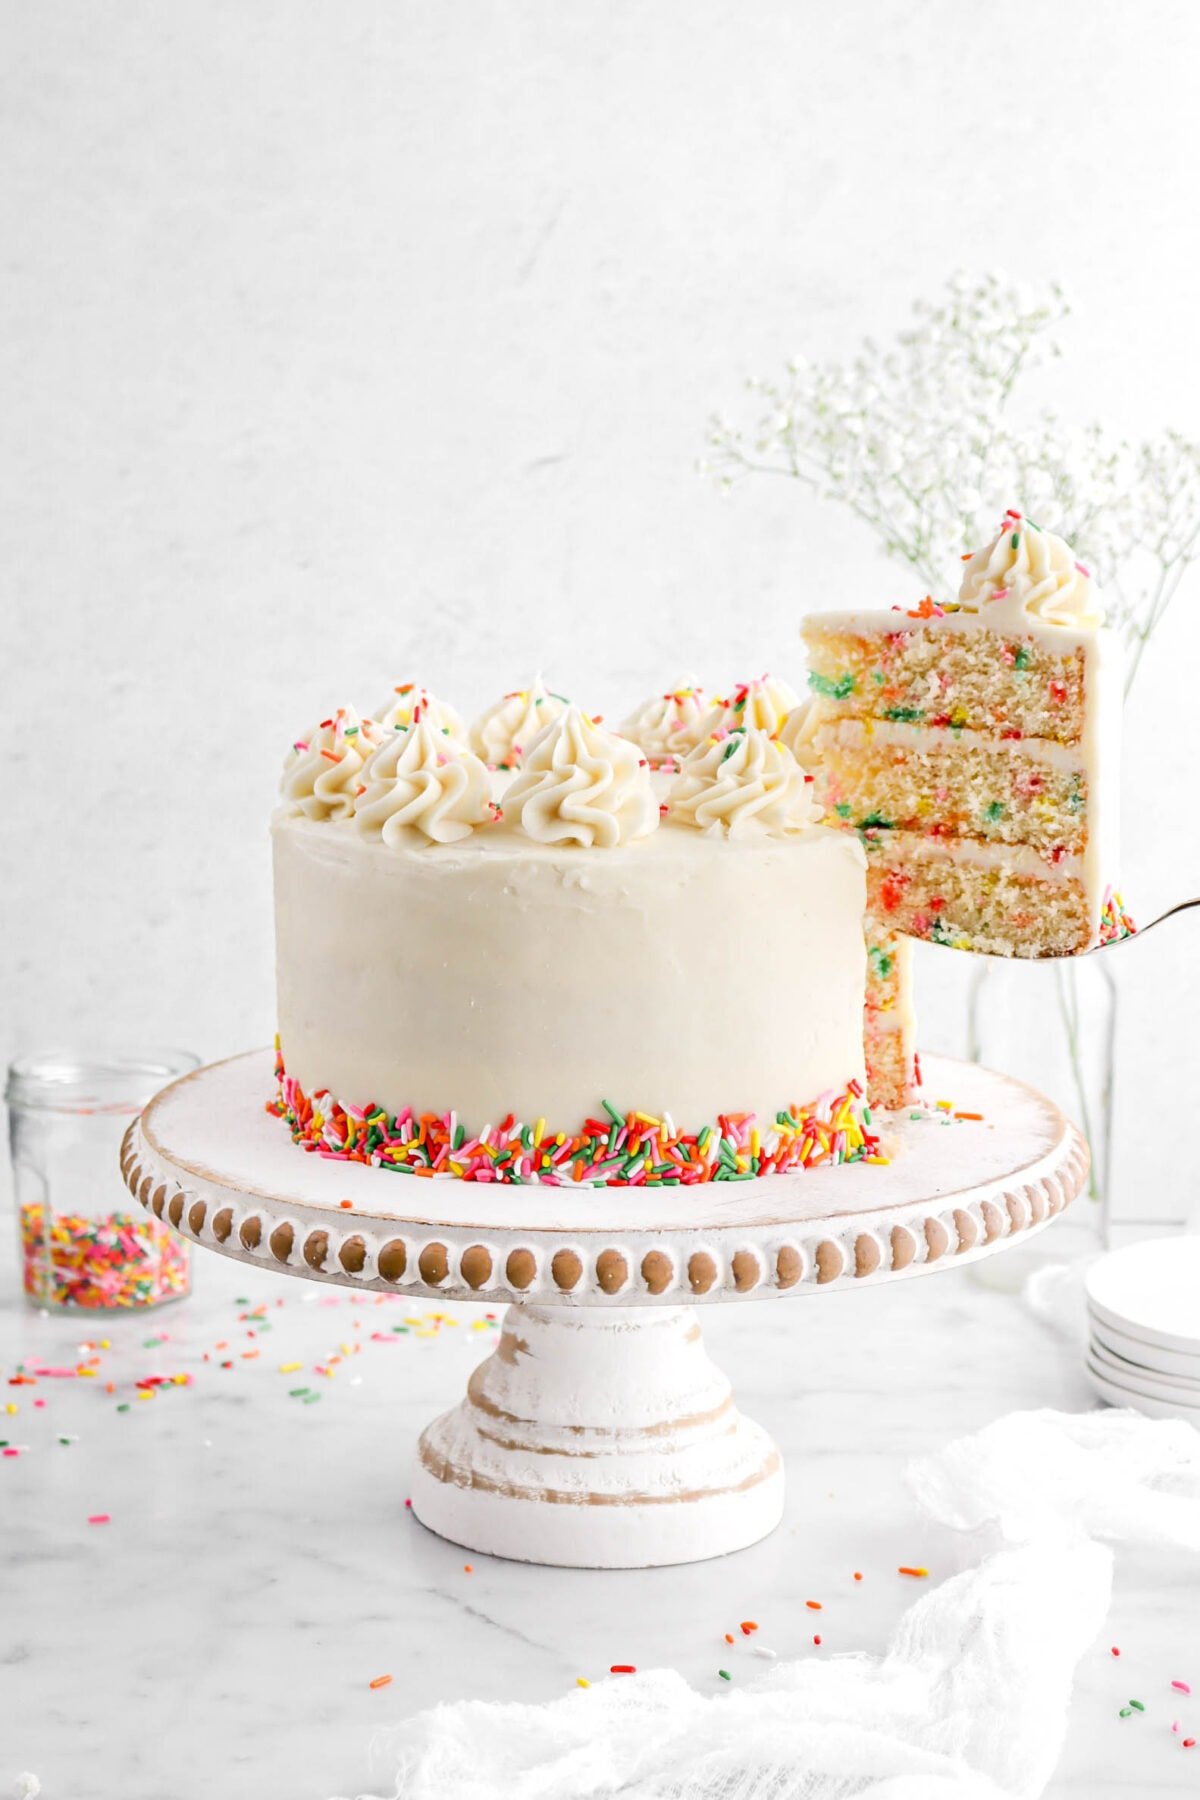 slice of funfetti cake being lifted away from cake on wood cake stand.